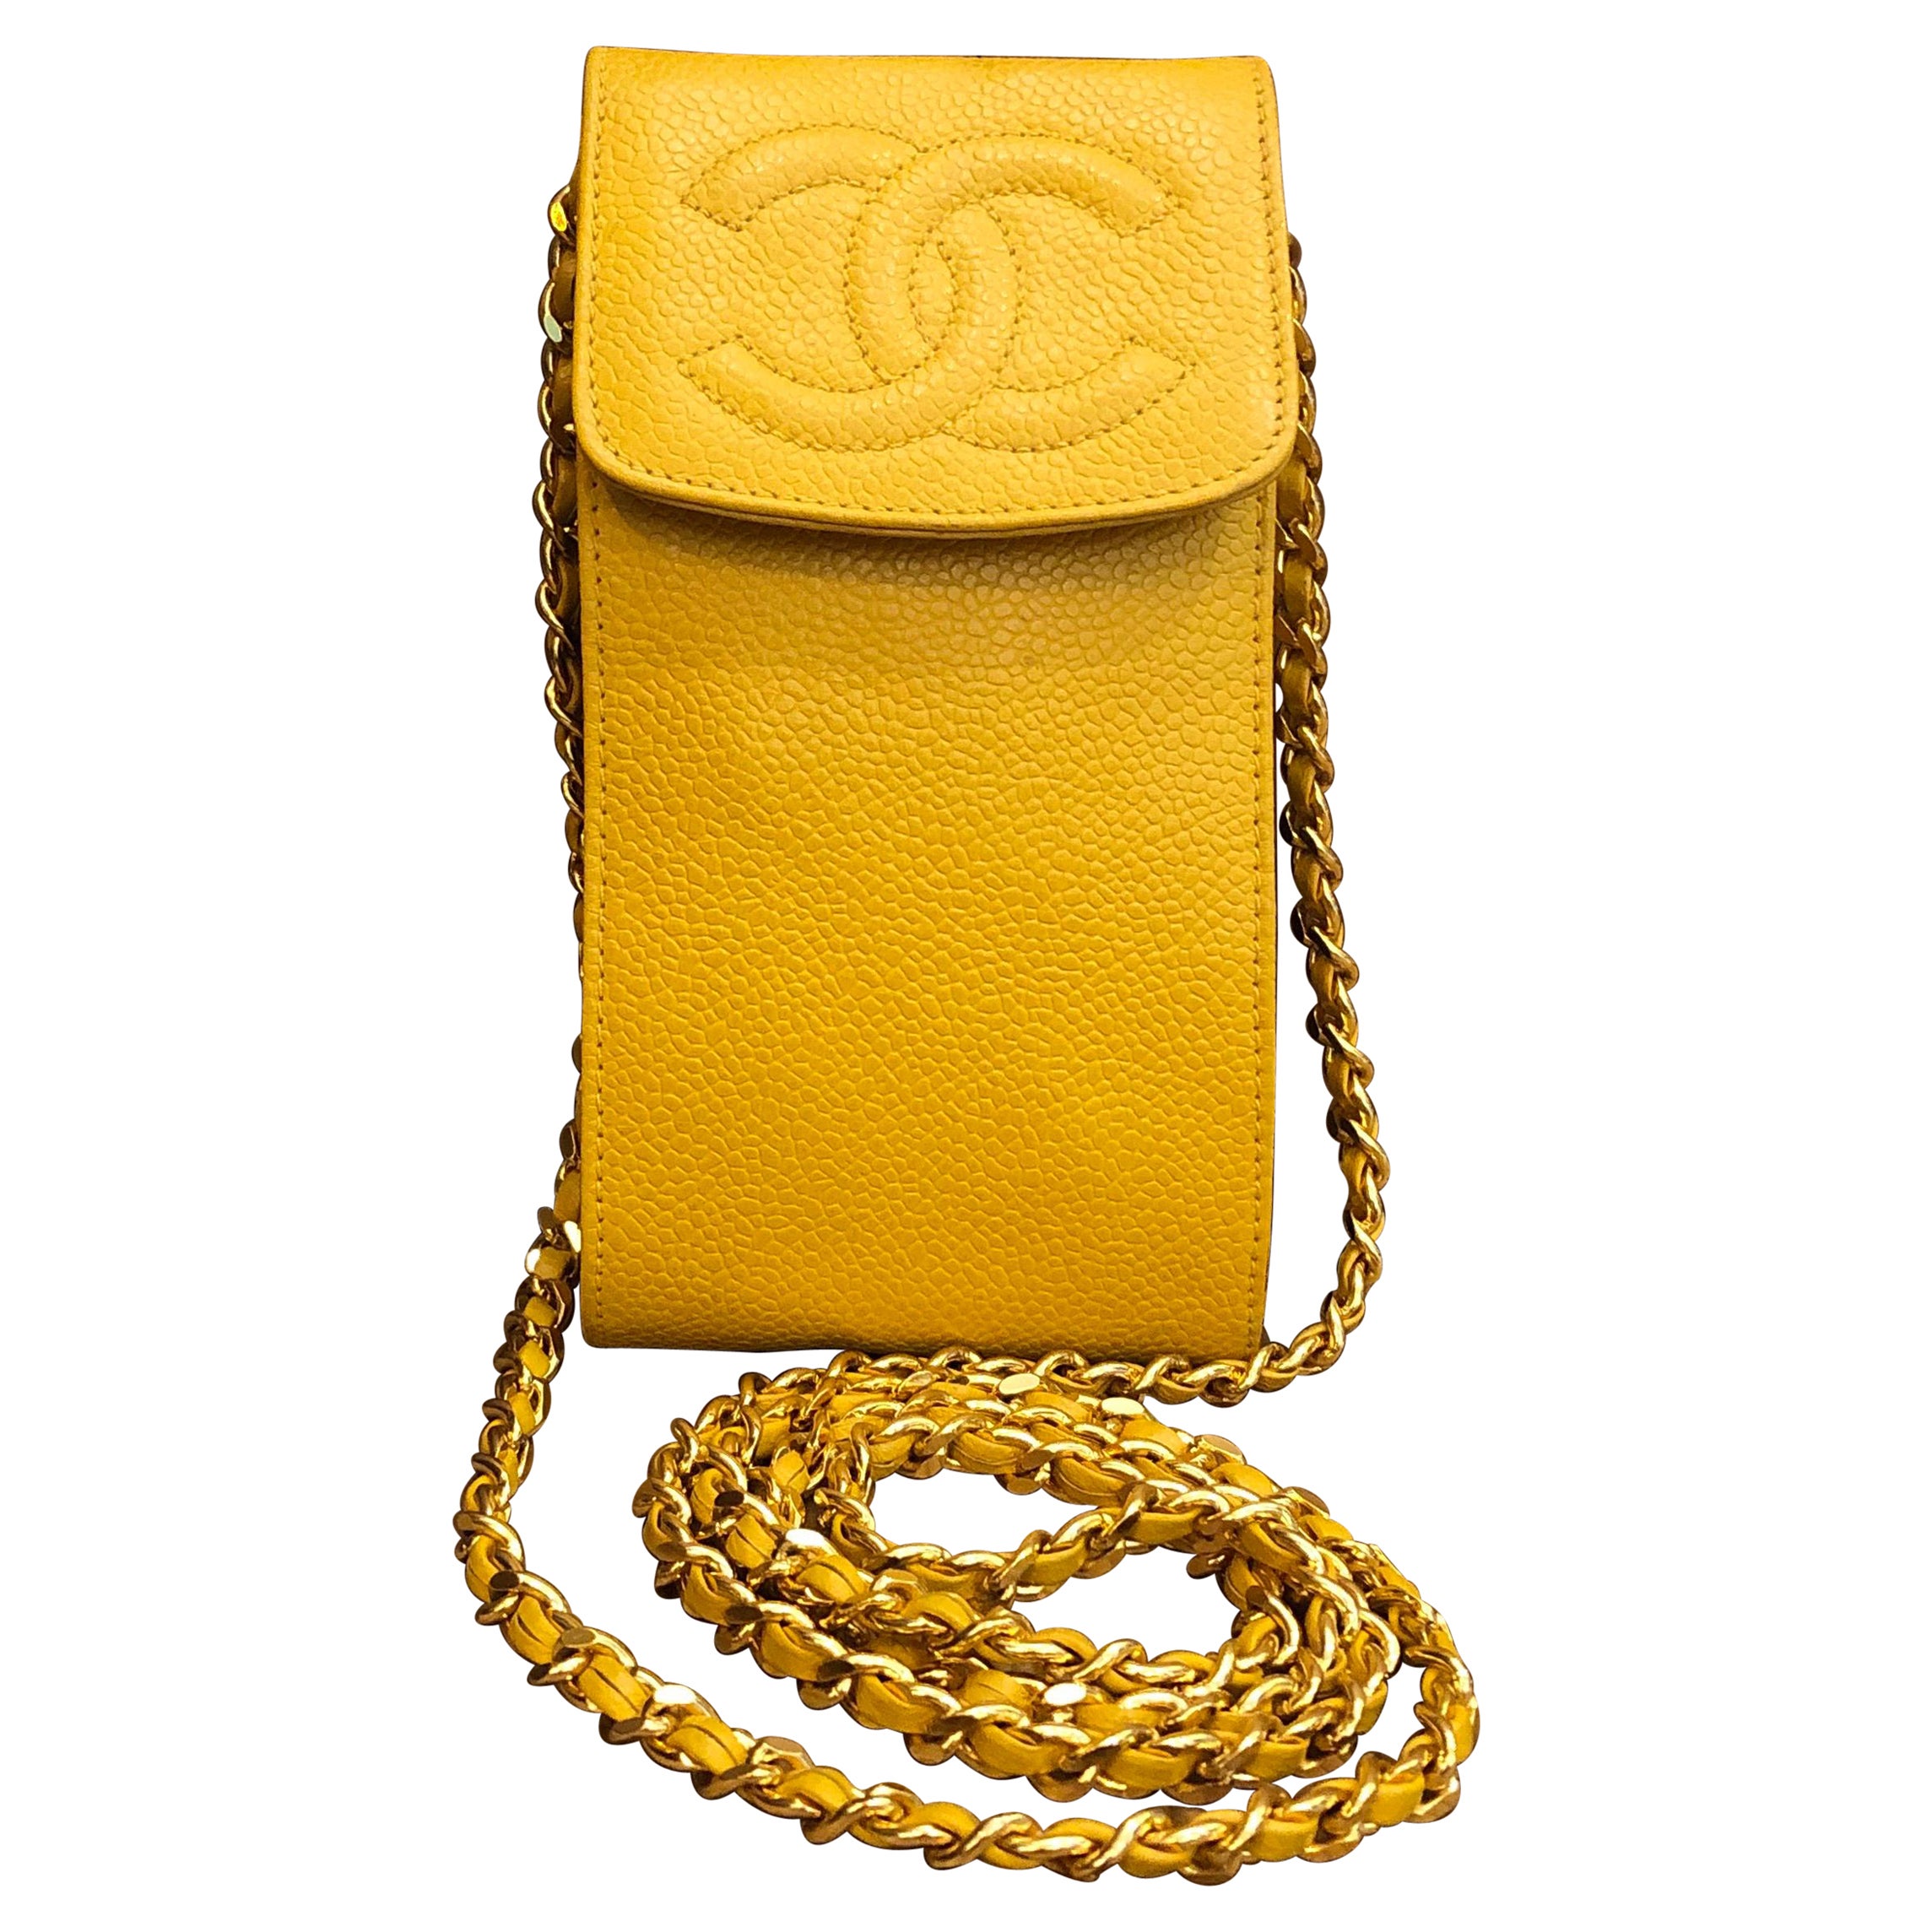 1990s Vintage CHANEL Yellow Caviar Leather Chain Pouch